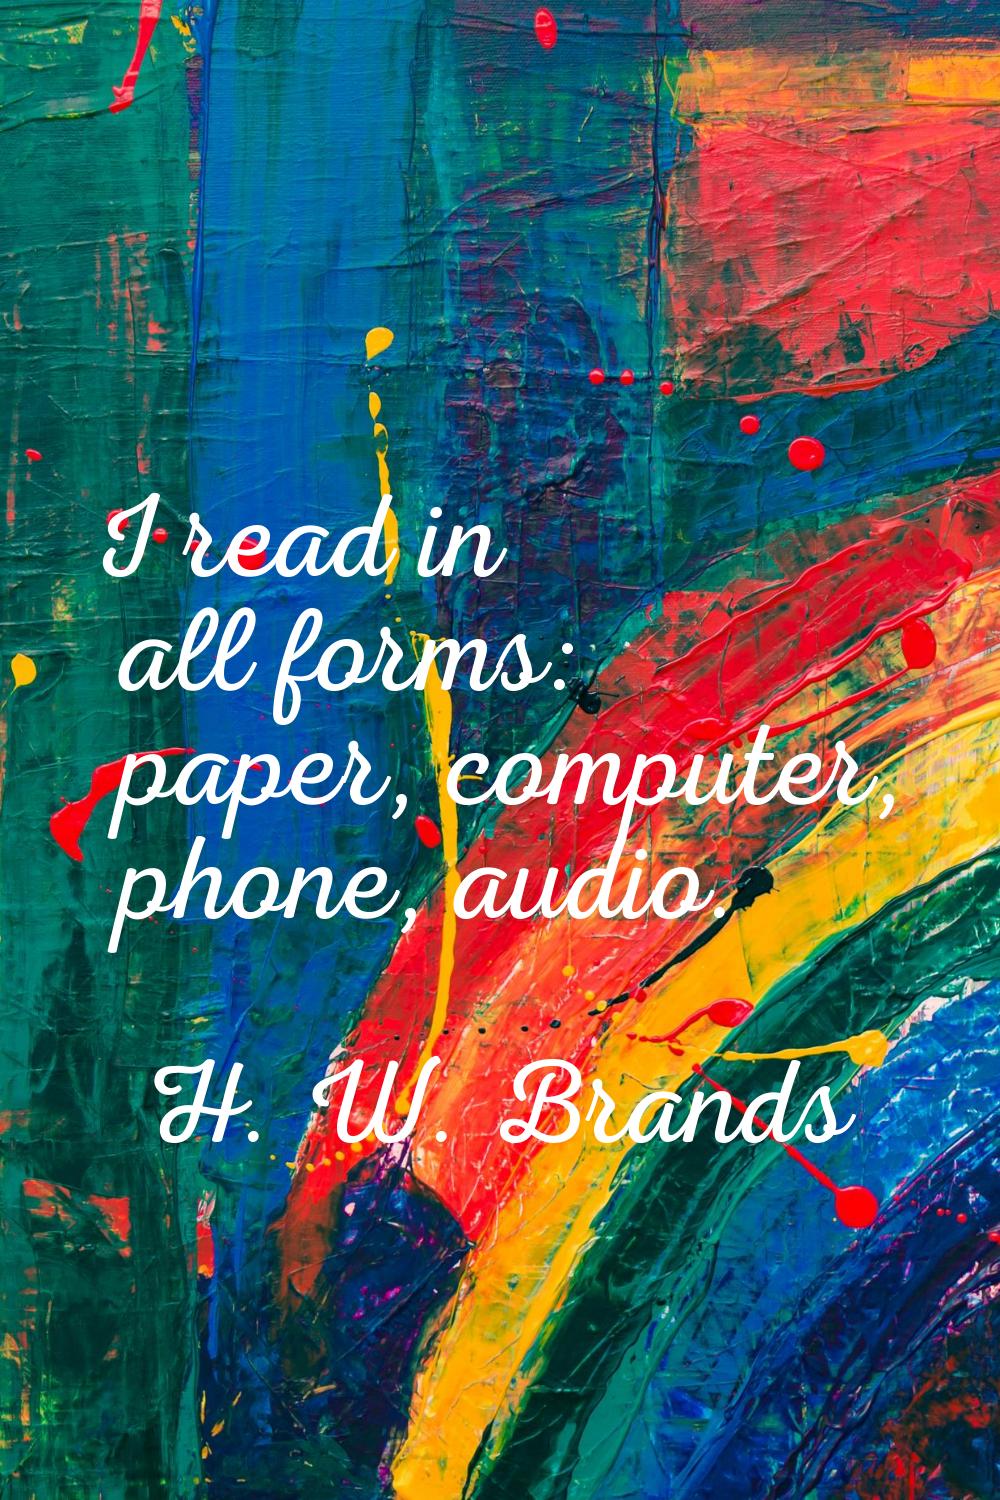 I read in all forms: paper, computer, phone, audio.